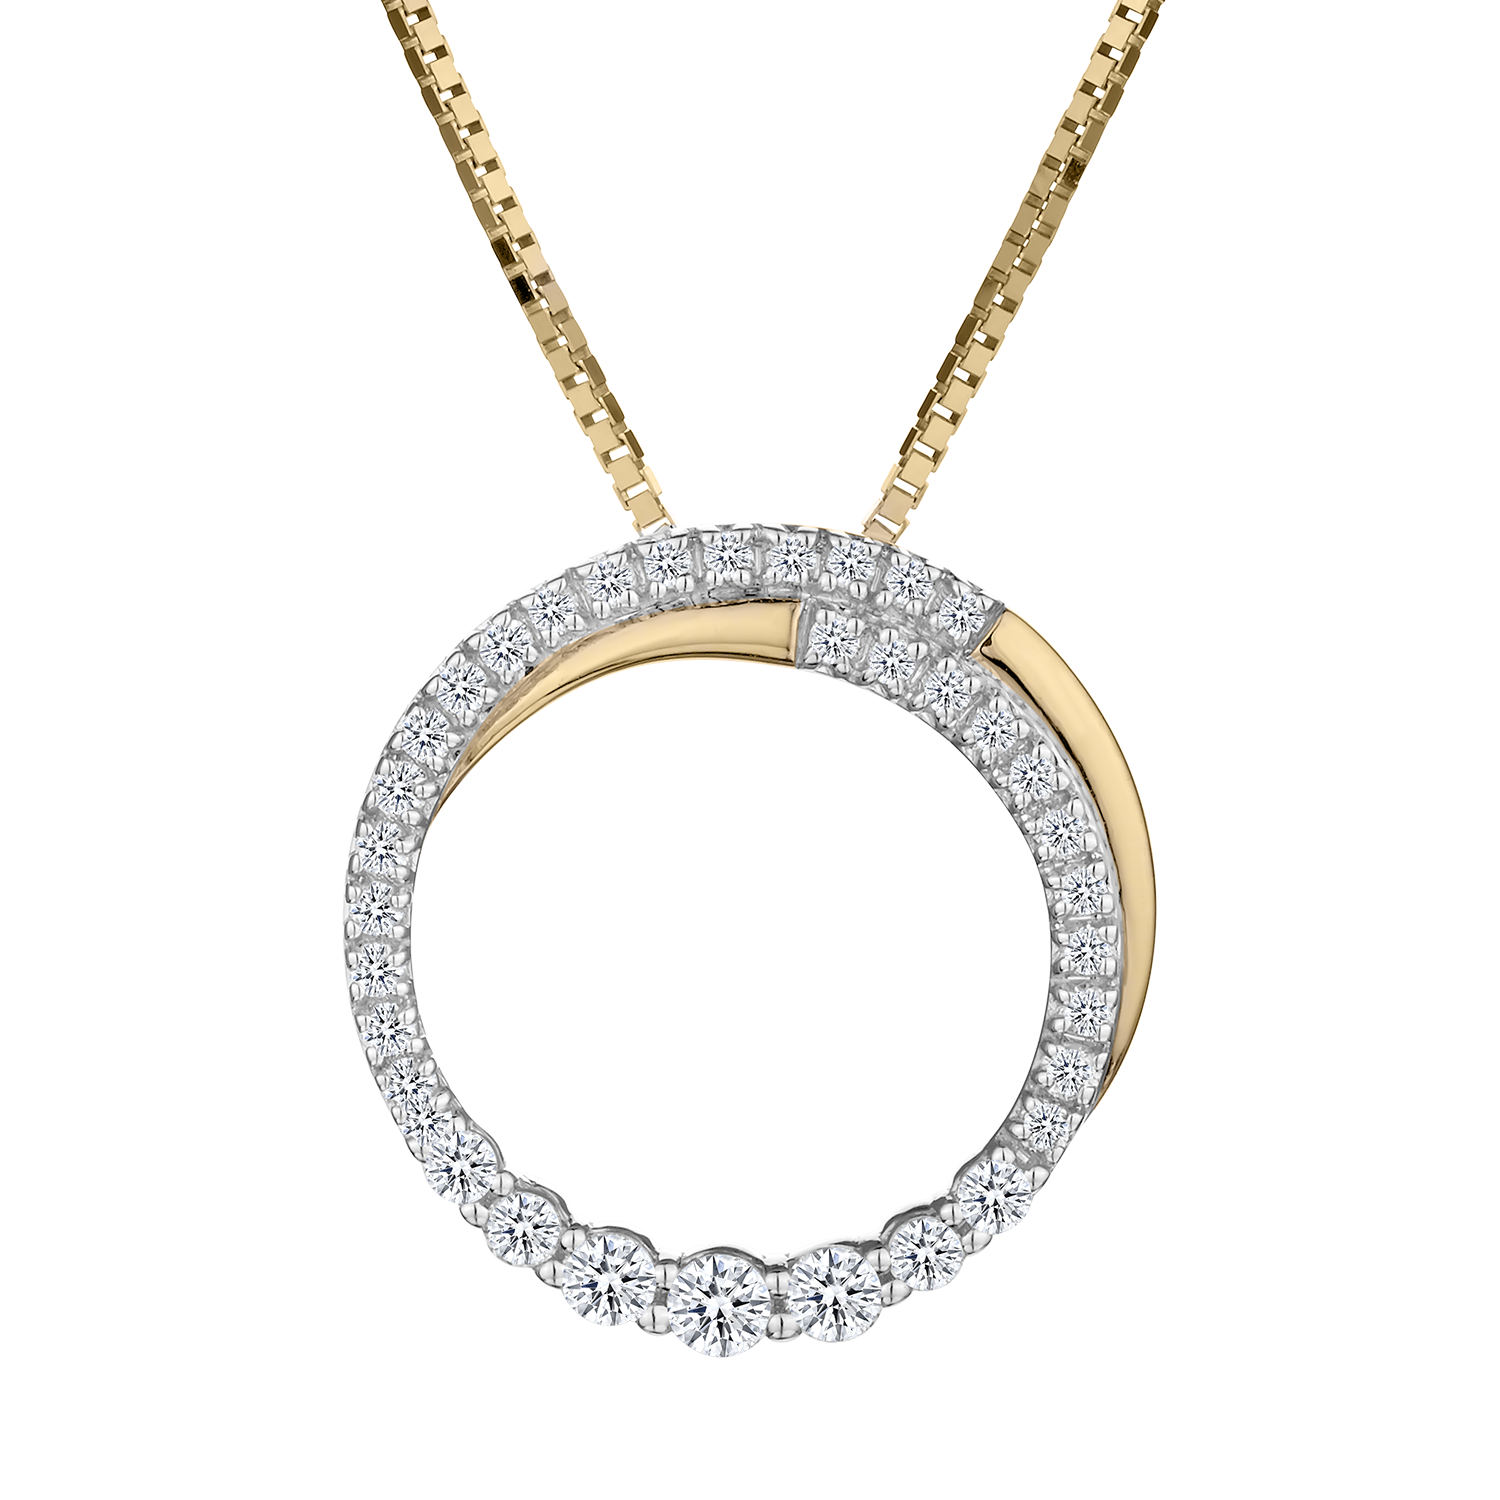 .25 Carat Diamond "Journey of Love" Circle Pendant,  10kt Yellow Gold. Necklaces and Pendants. Griffin Jewellery Designs.